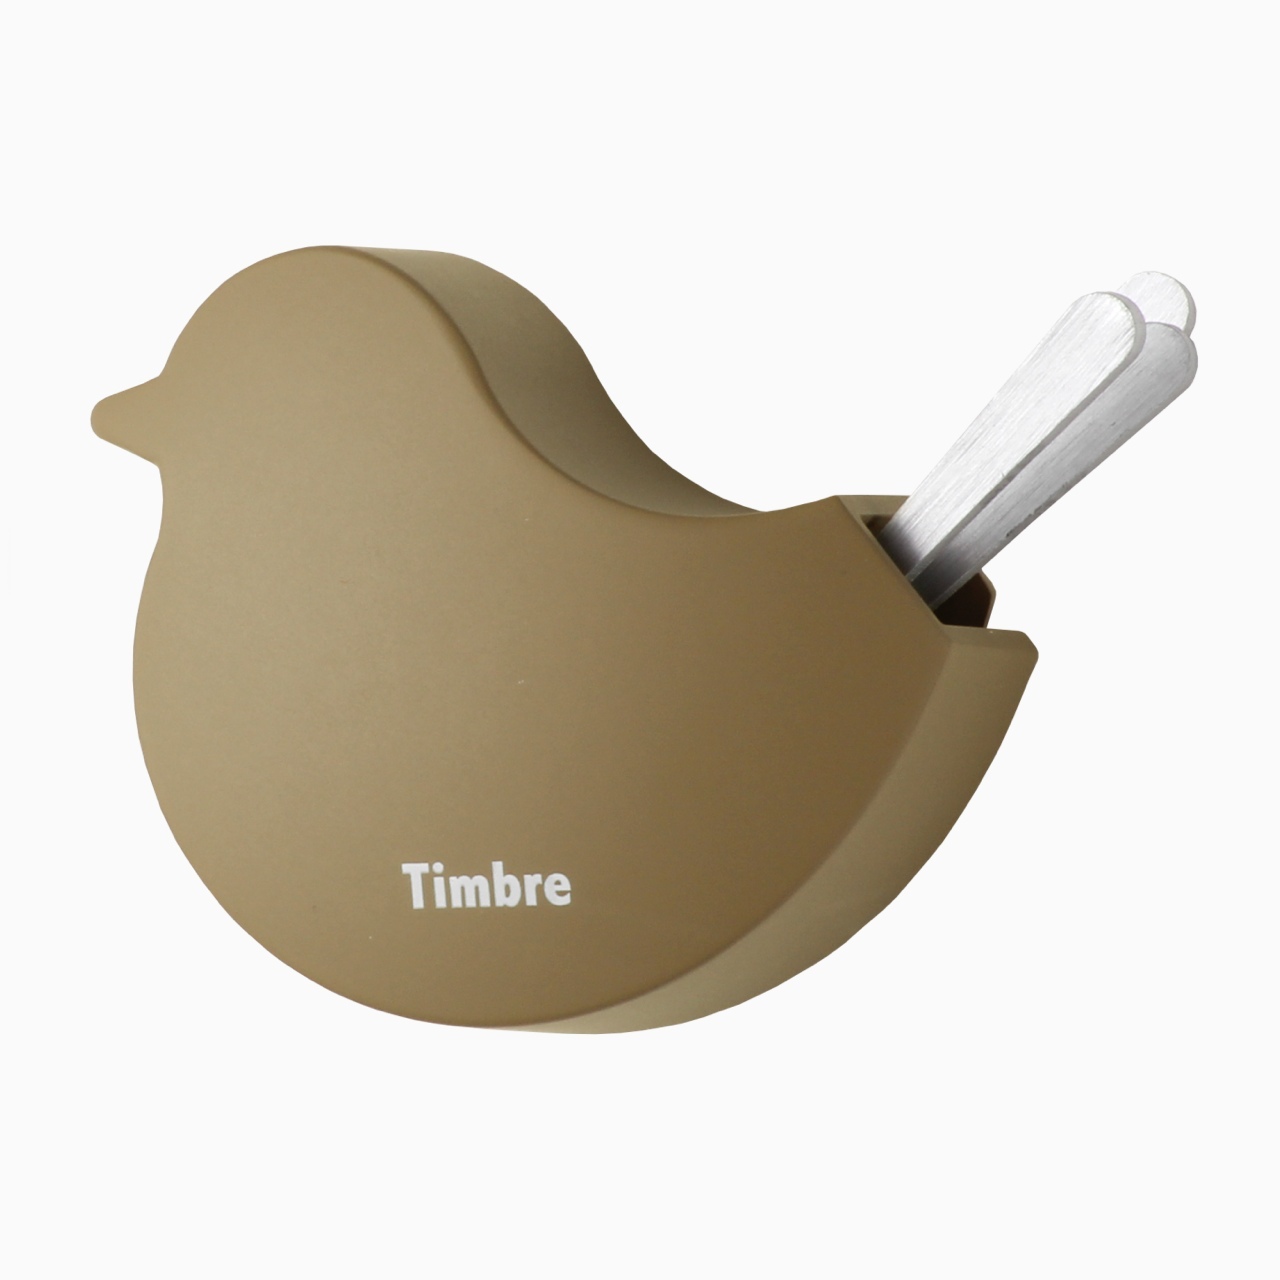 This cute door chime welcomes guests with tranquil notes like a chirpy bird